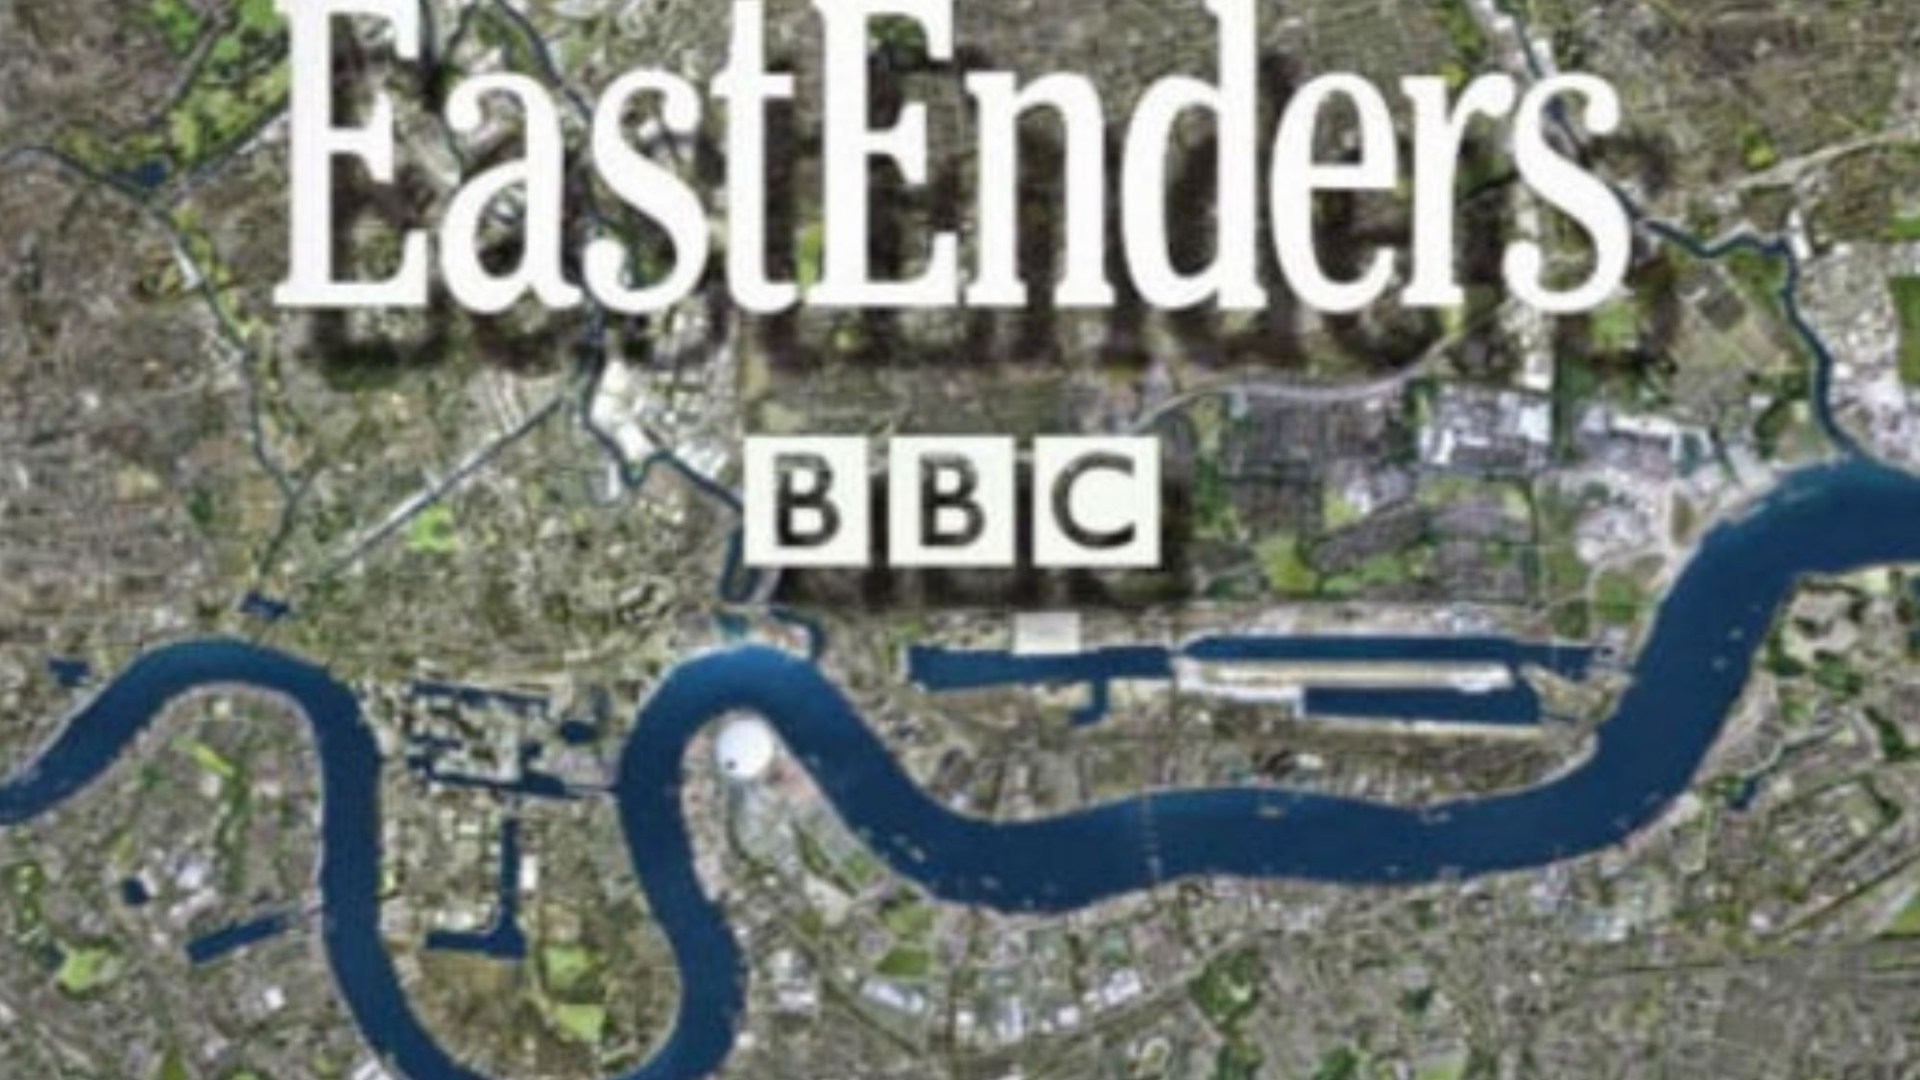 EastEnders fans sink claws into ‘world’s most boring exit’ as they slam star’s letdown goodbye after ‘weeks of hype’ [Video]